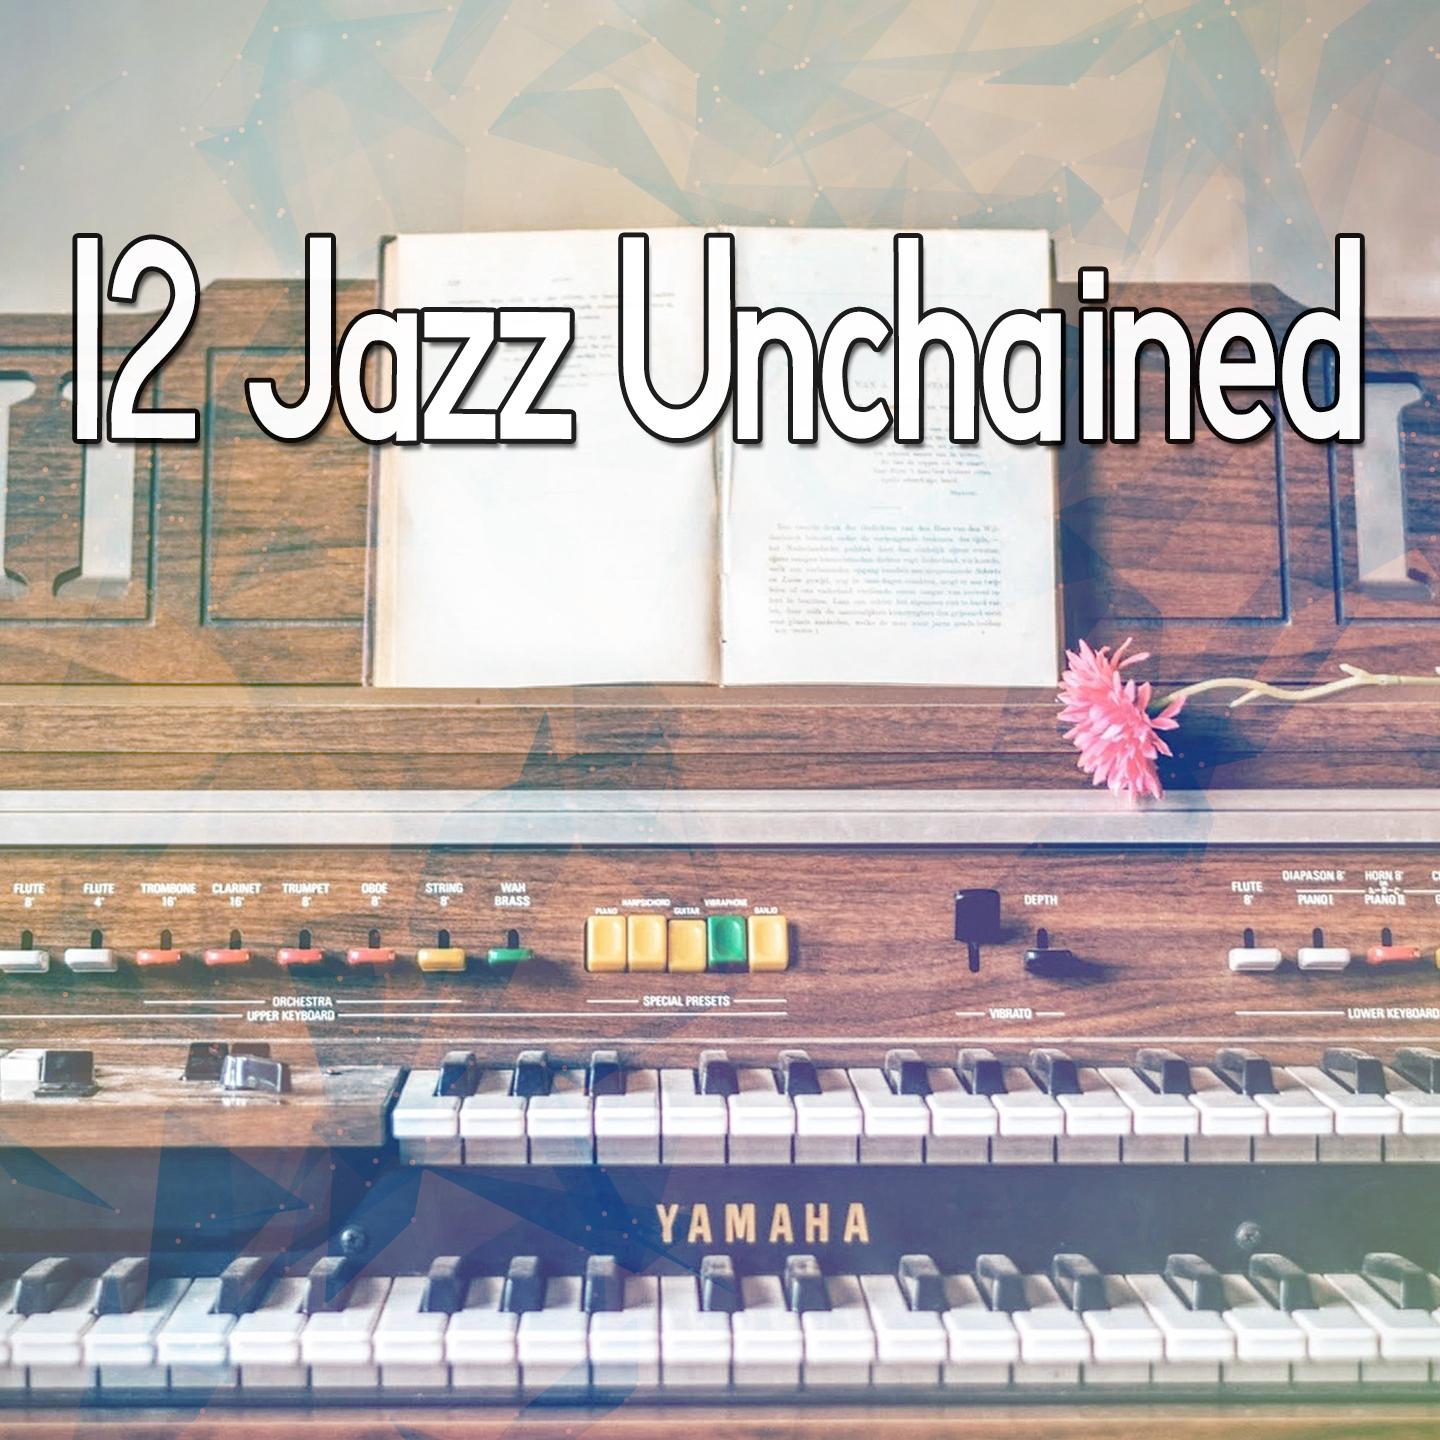 12 Jazz Unchained